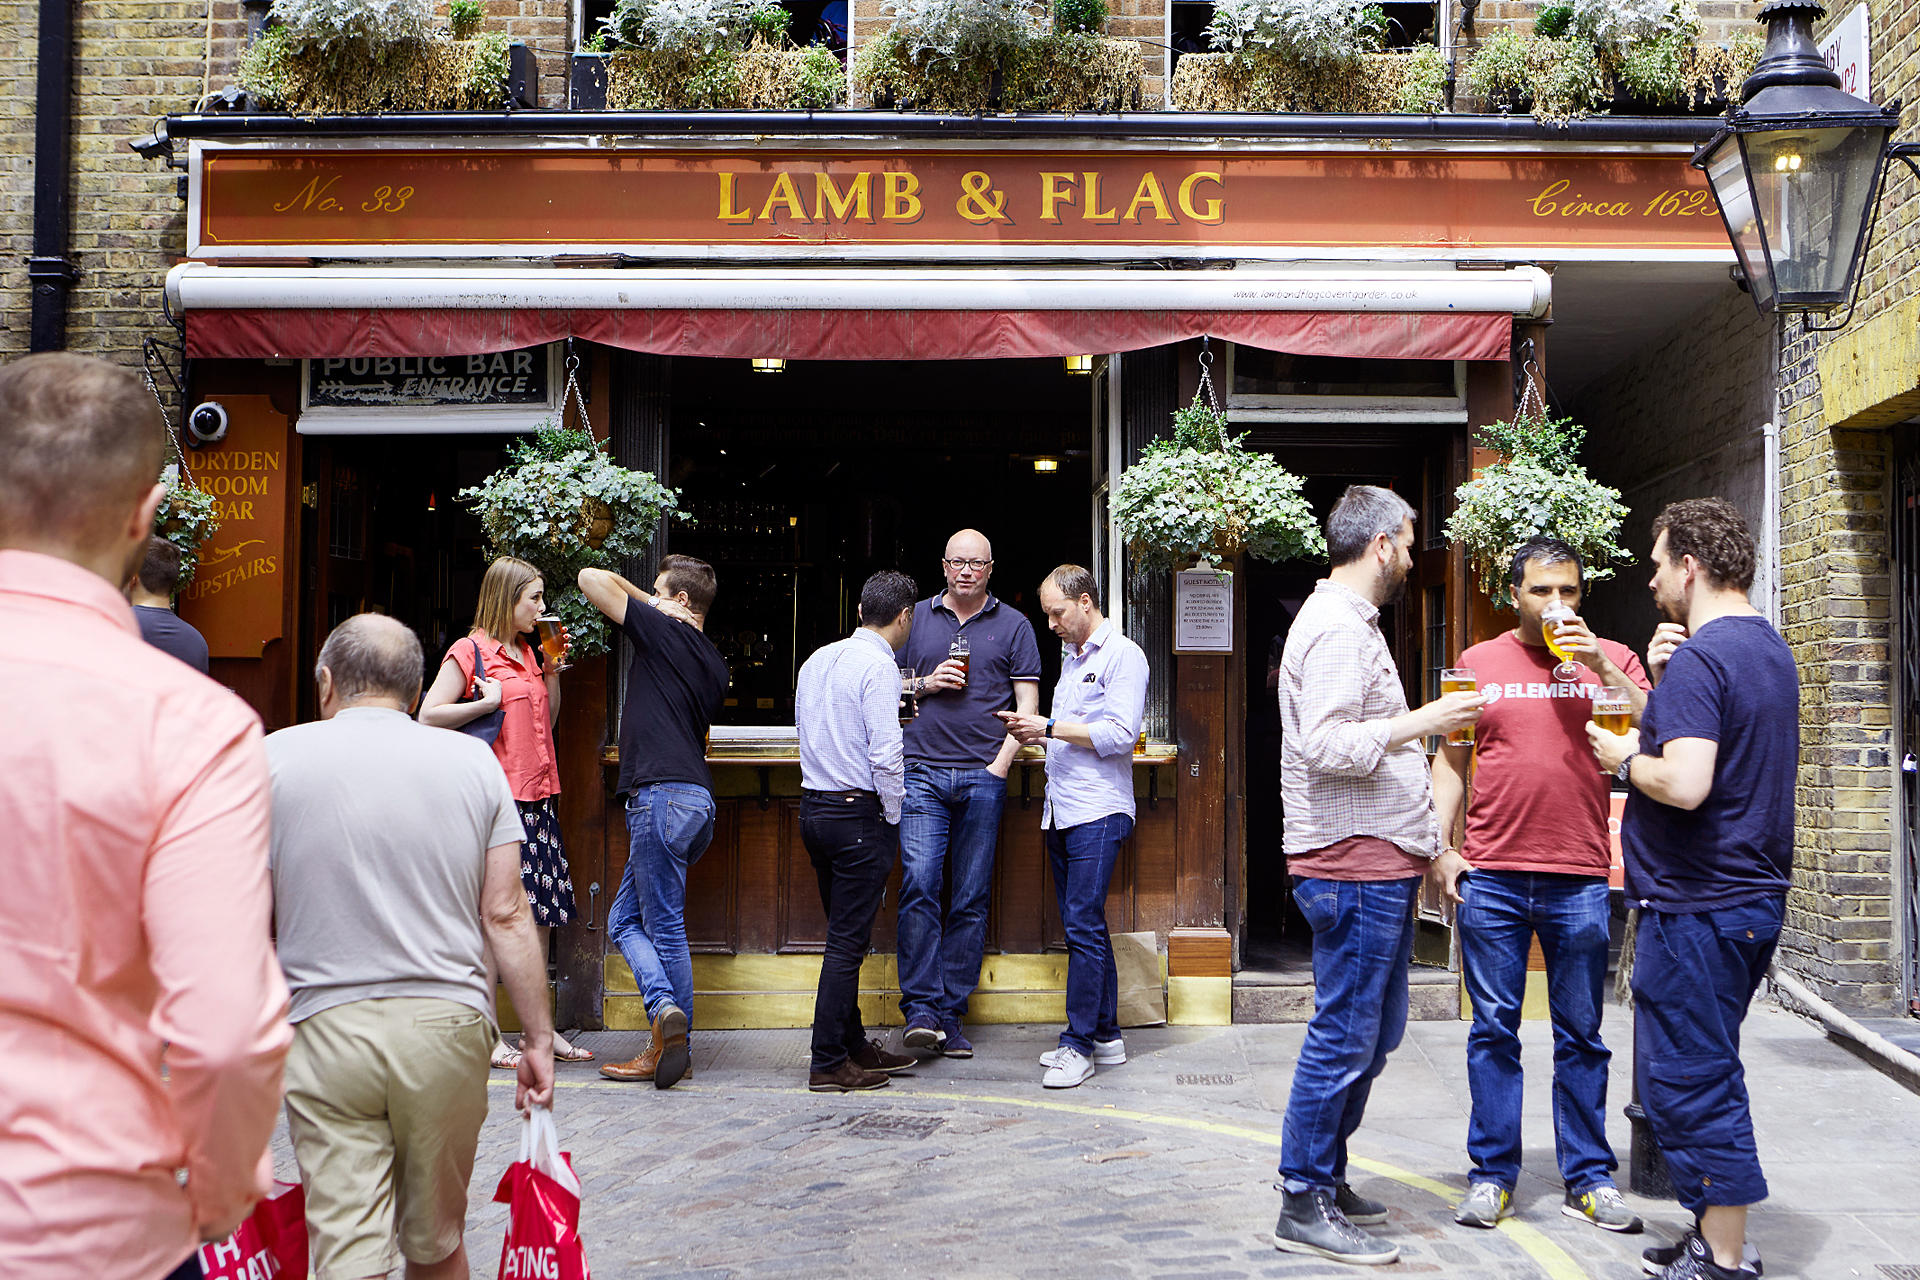 Images The Lamb & Flag, Covent Garden